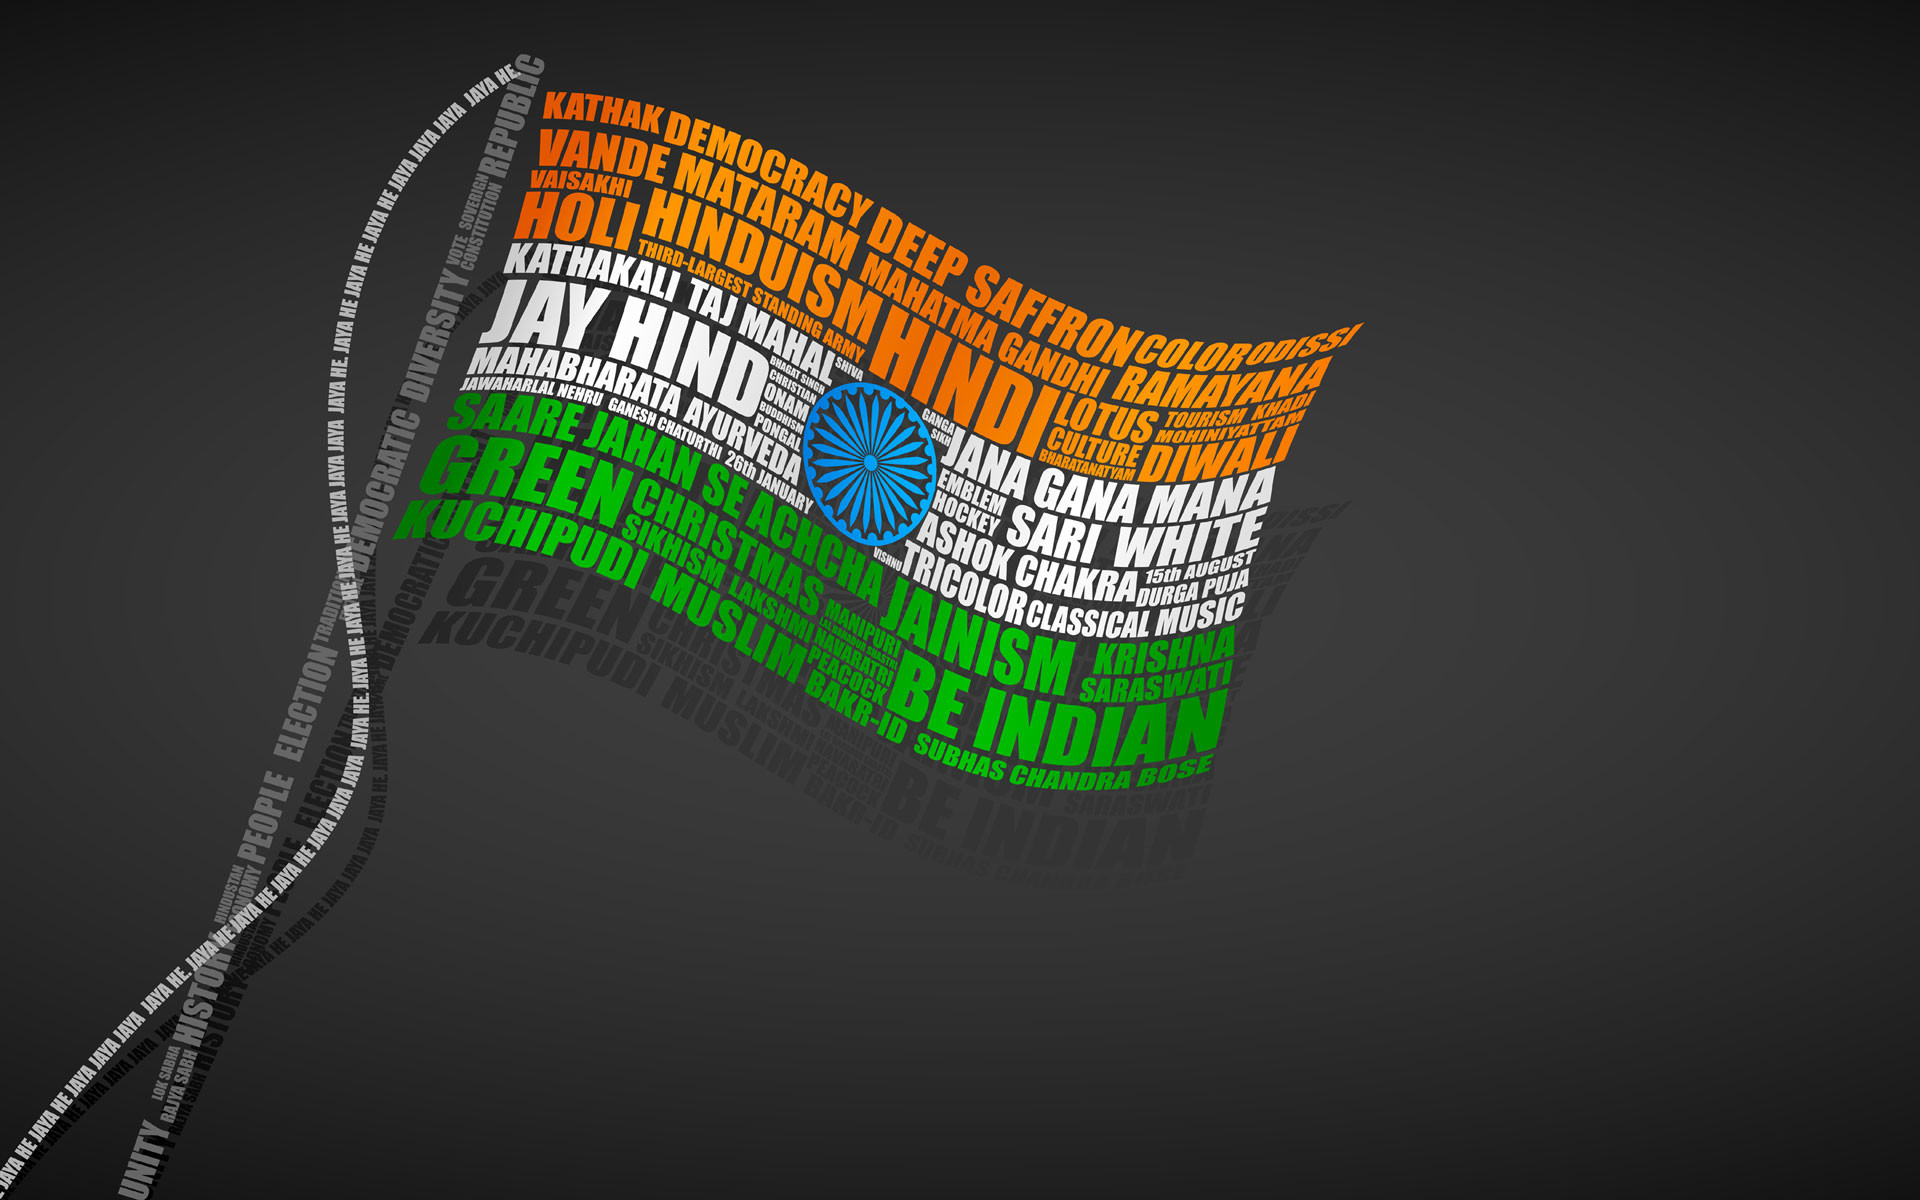 1920x1200 25+ beautiful Indian flag images download ideas on Pinterest | Indian flag  download, Images of indian flag and Flag india